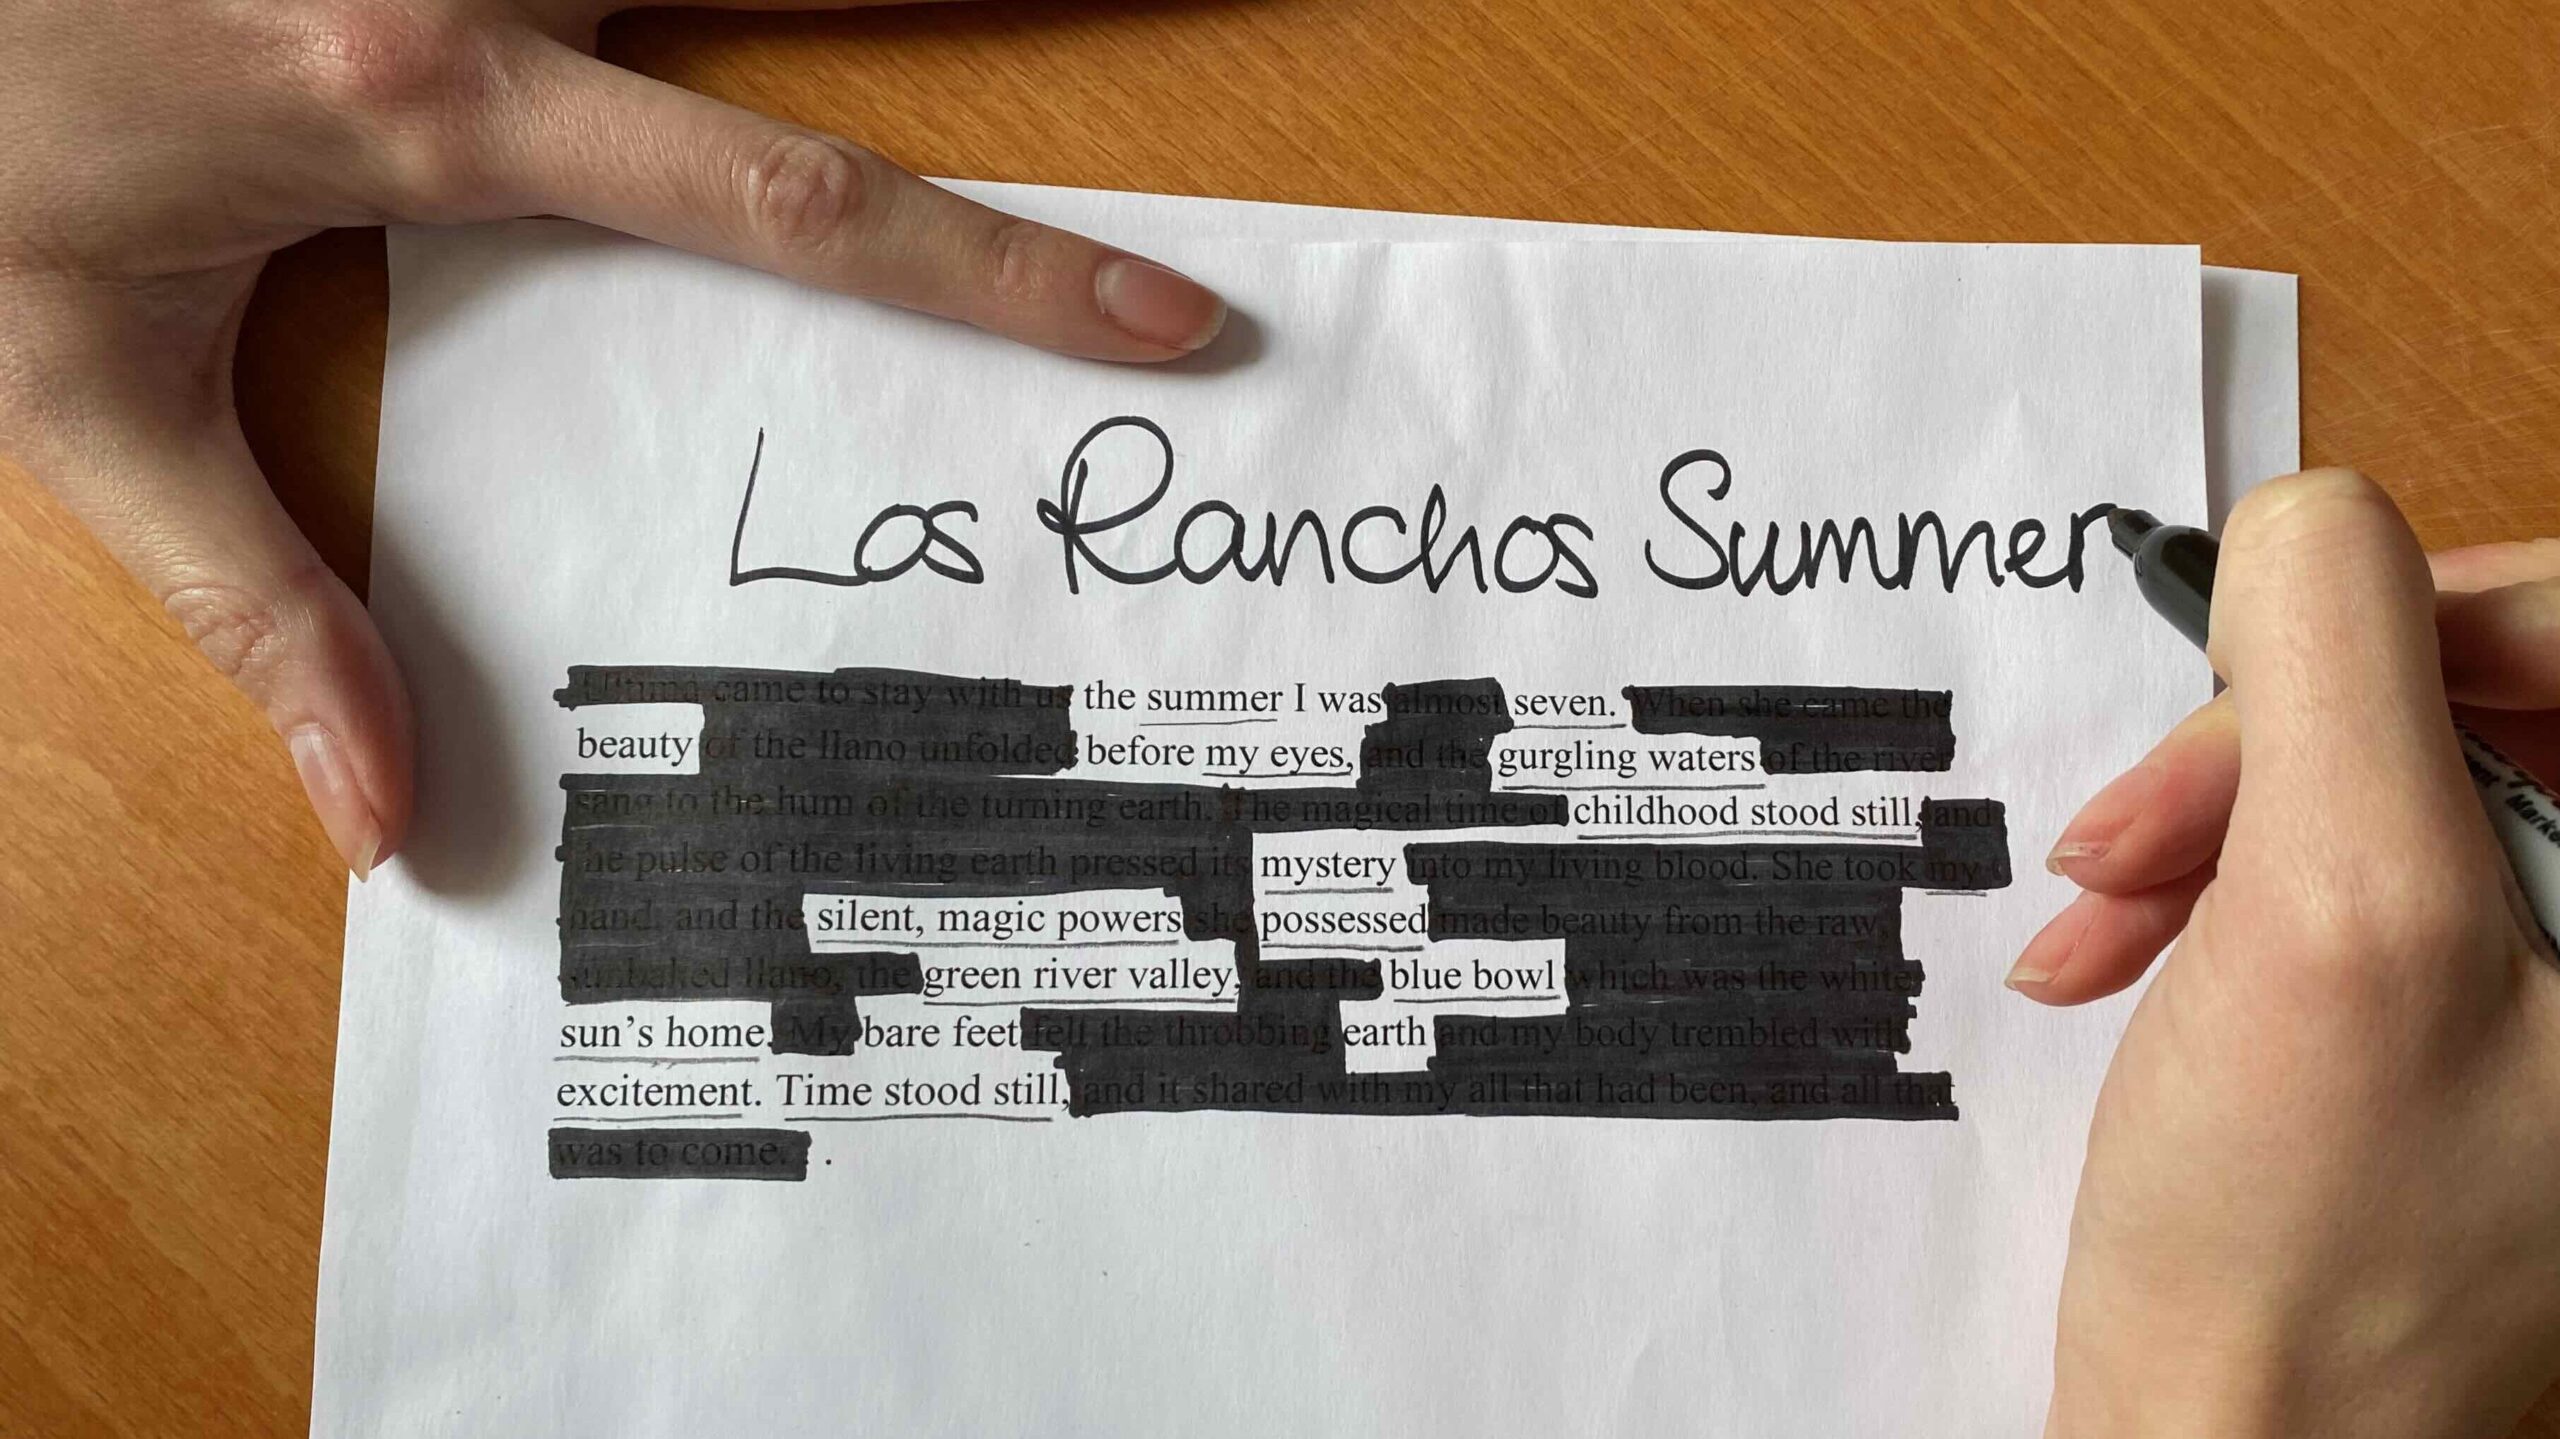 Erasure poetry example: 
Los Ranchos Summer
the summer I was seven
beauty before my eyes,
gurgling waters
childhood stood still
mystery
silent, magic powers possessed
green river valley
blue bowl
sun's home
bare feet
earth excitement.
Time stood still